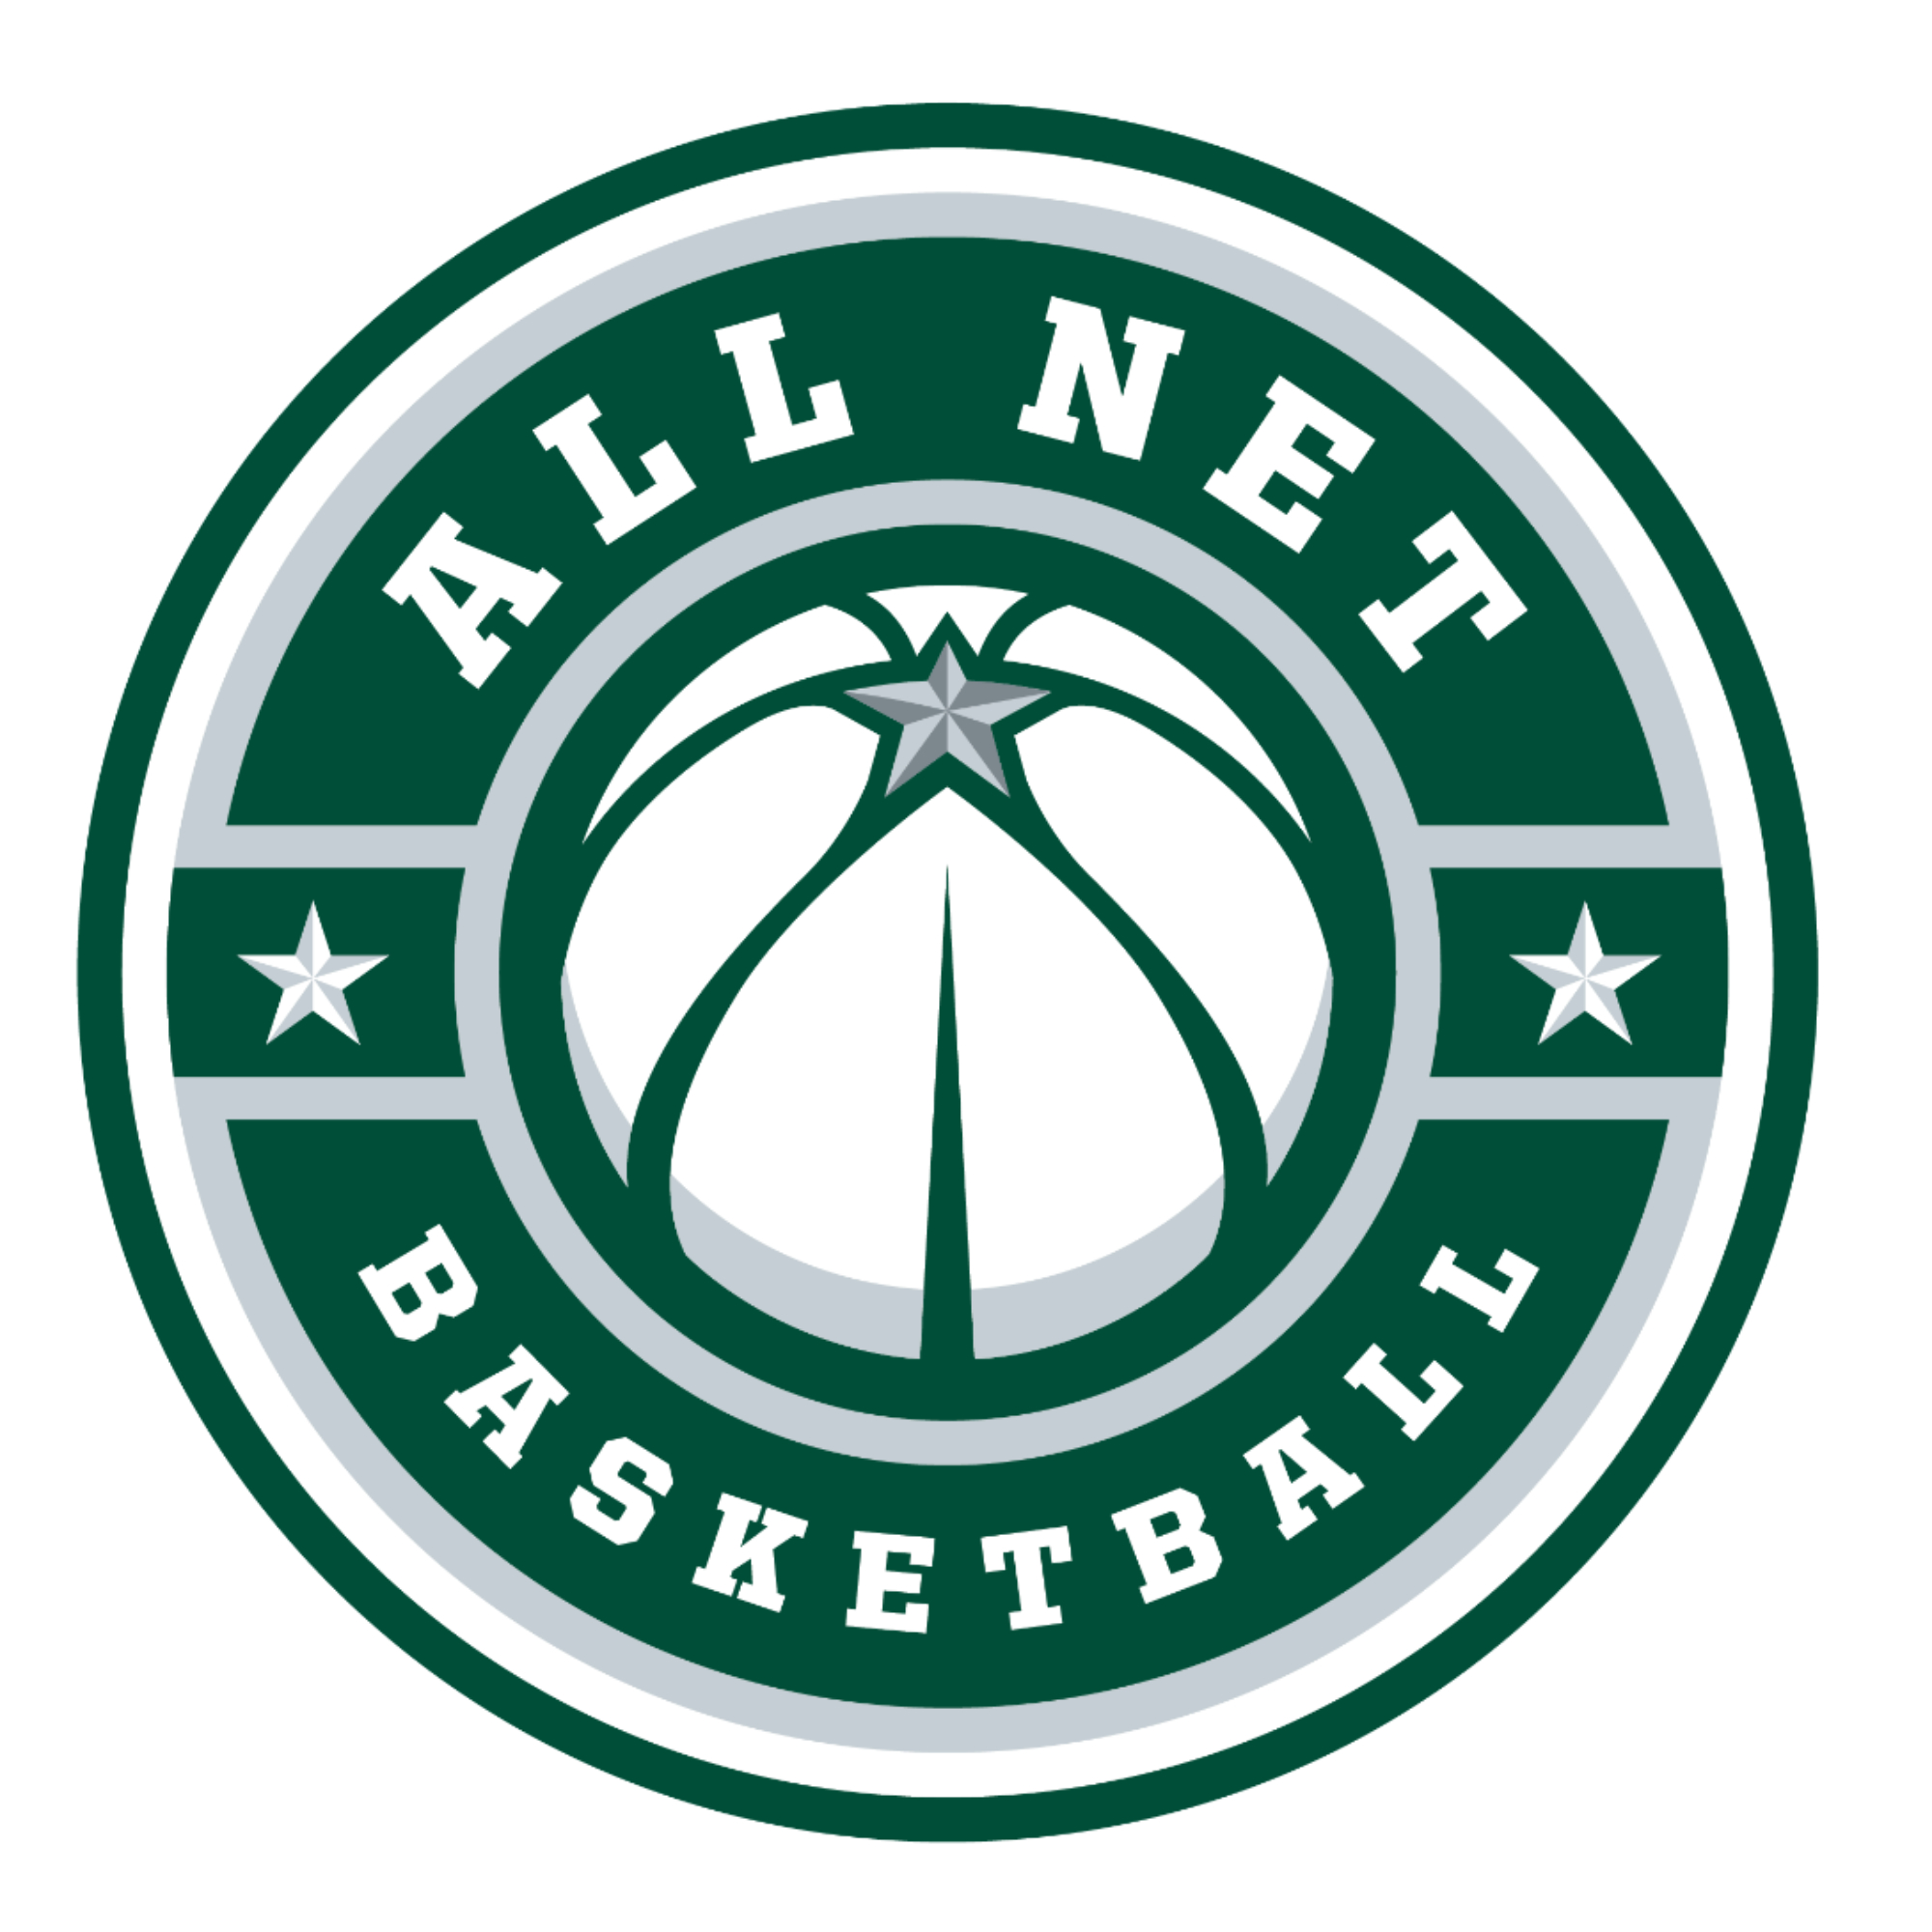 The official logo of All Net Basketball Club